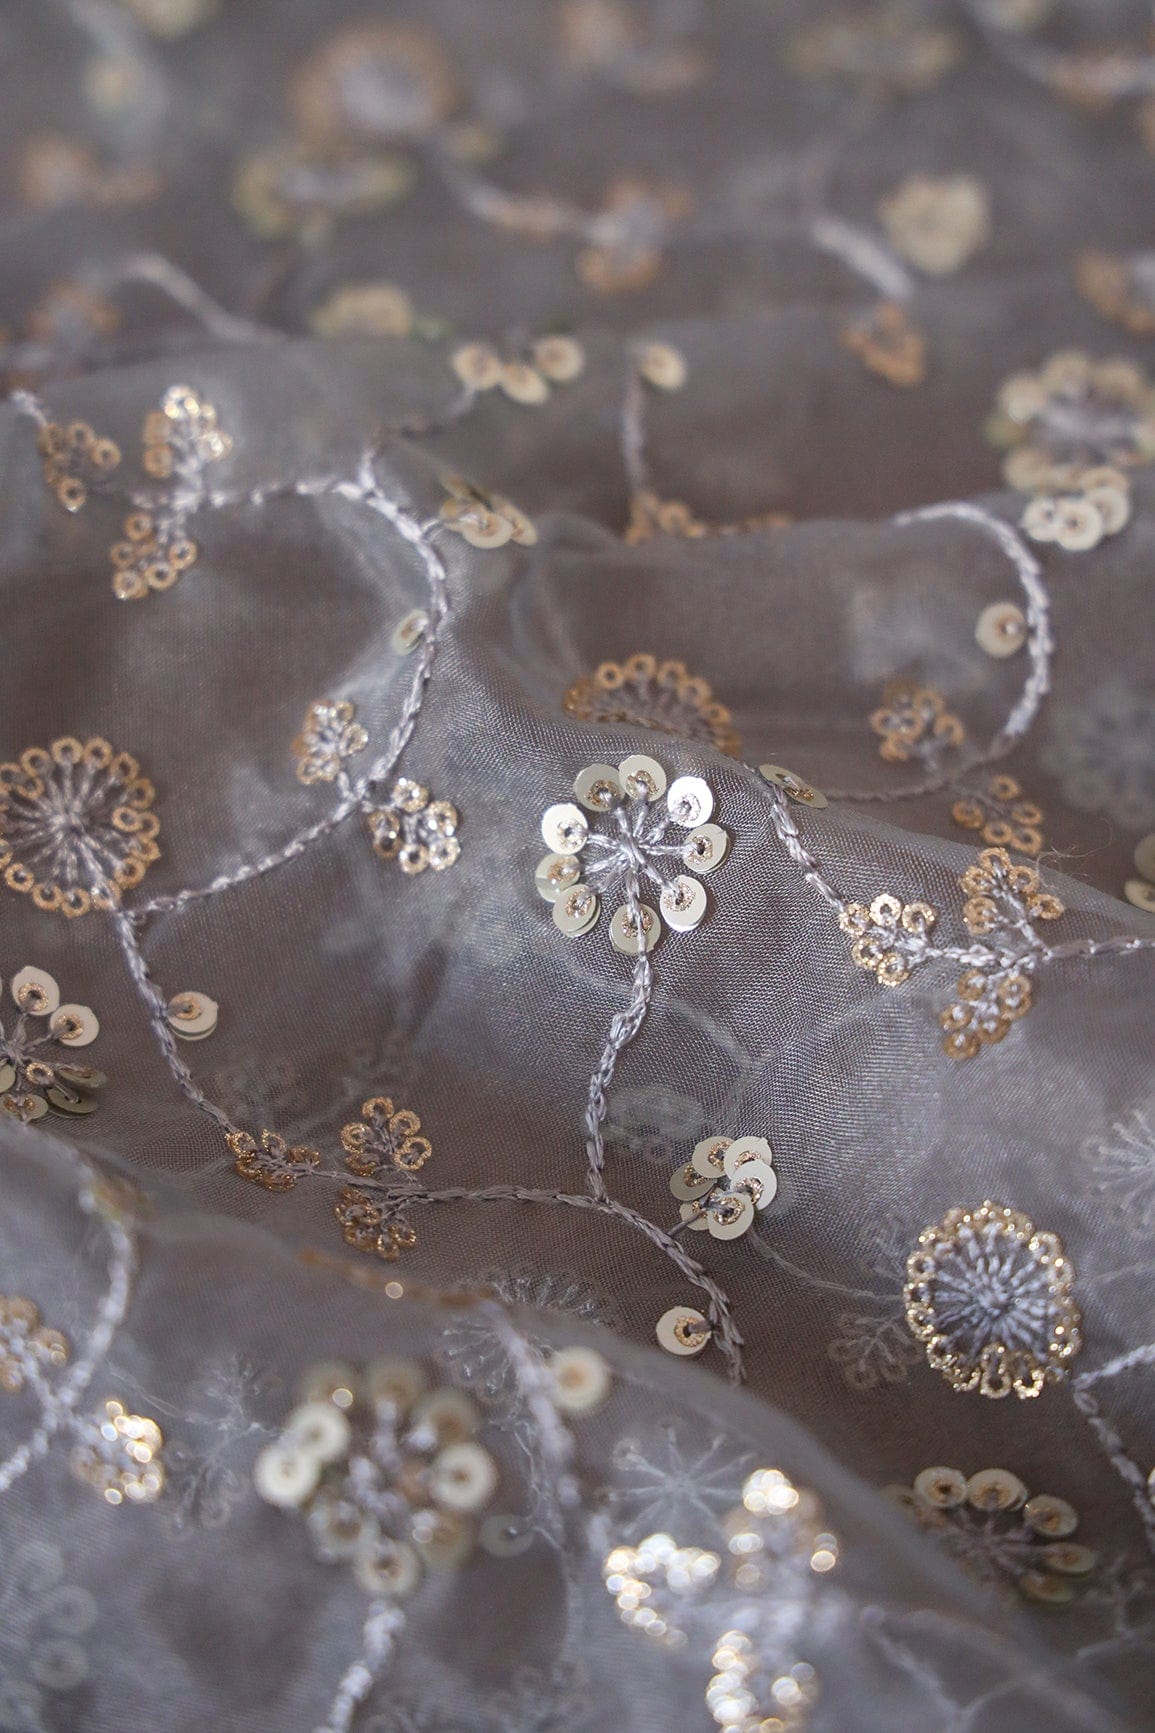 doeraa Embroidery Fabrics 1 Meter Cut Piece Of Gold And Silver Sequins Floral Embroidery Work On Grey Organza Fabric